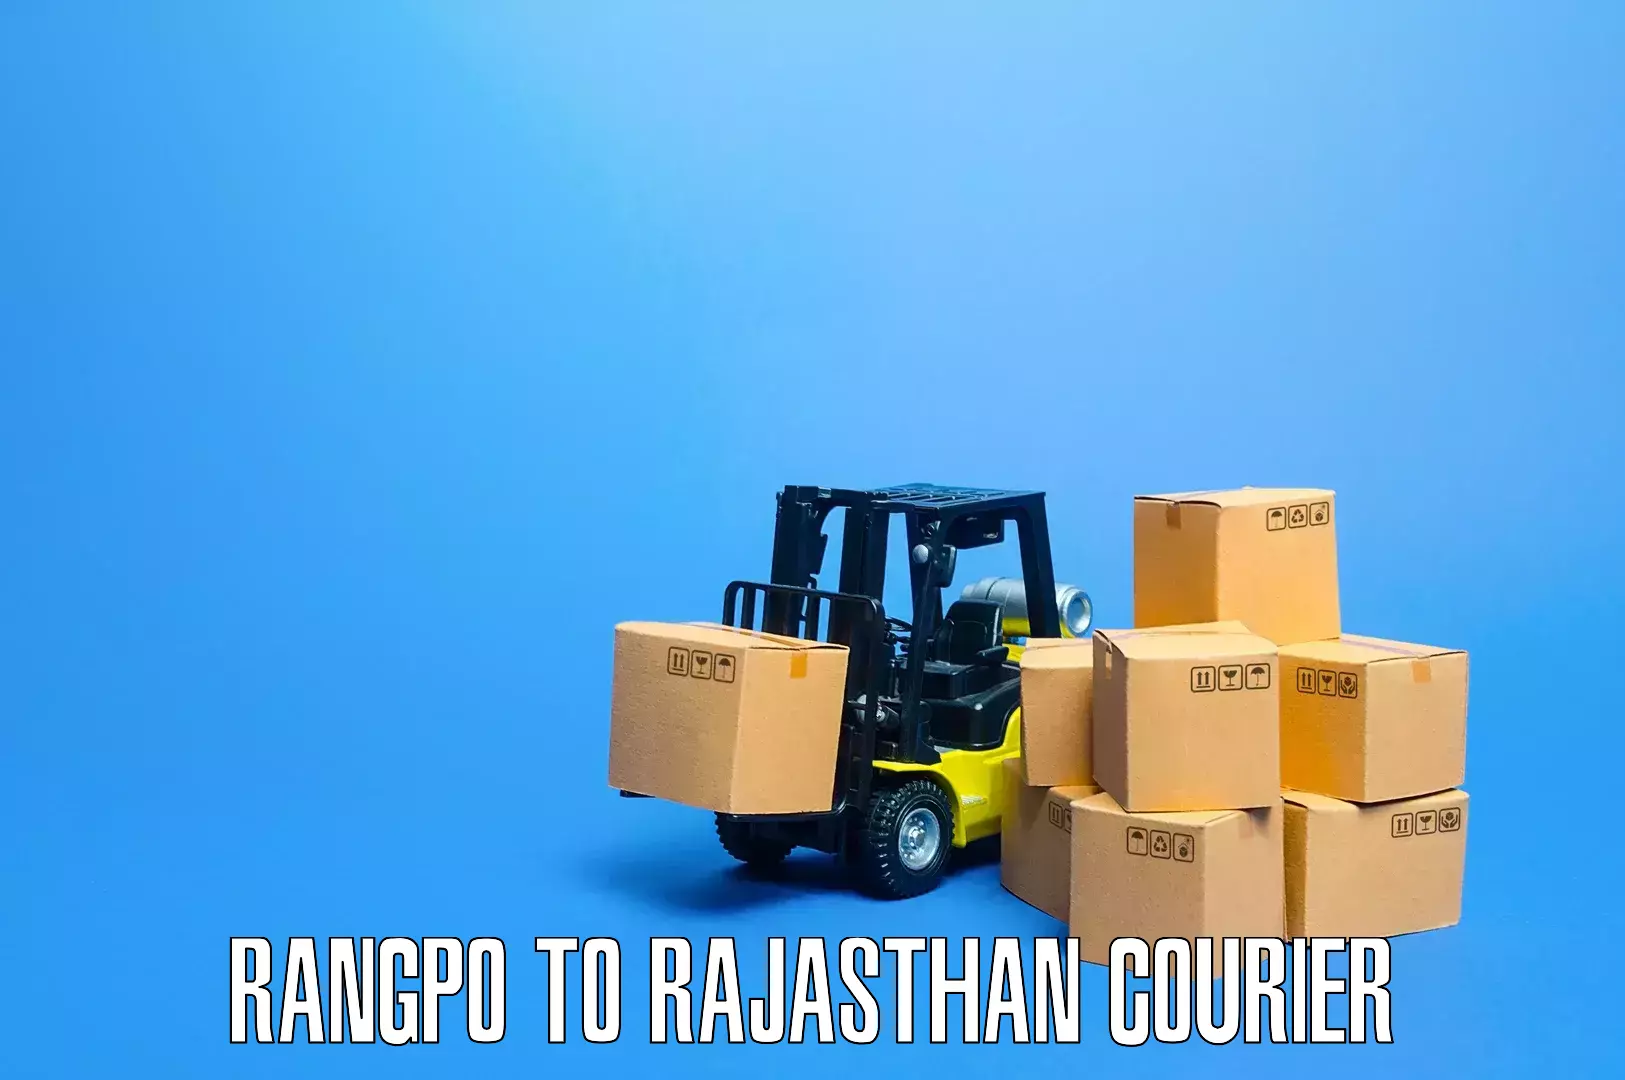 Quality moving and storage Rangpo to Piparcity